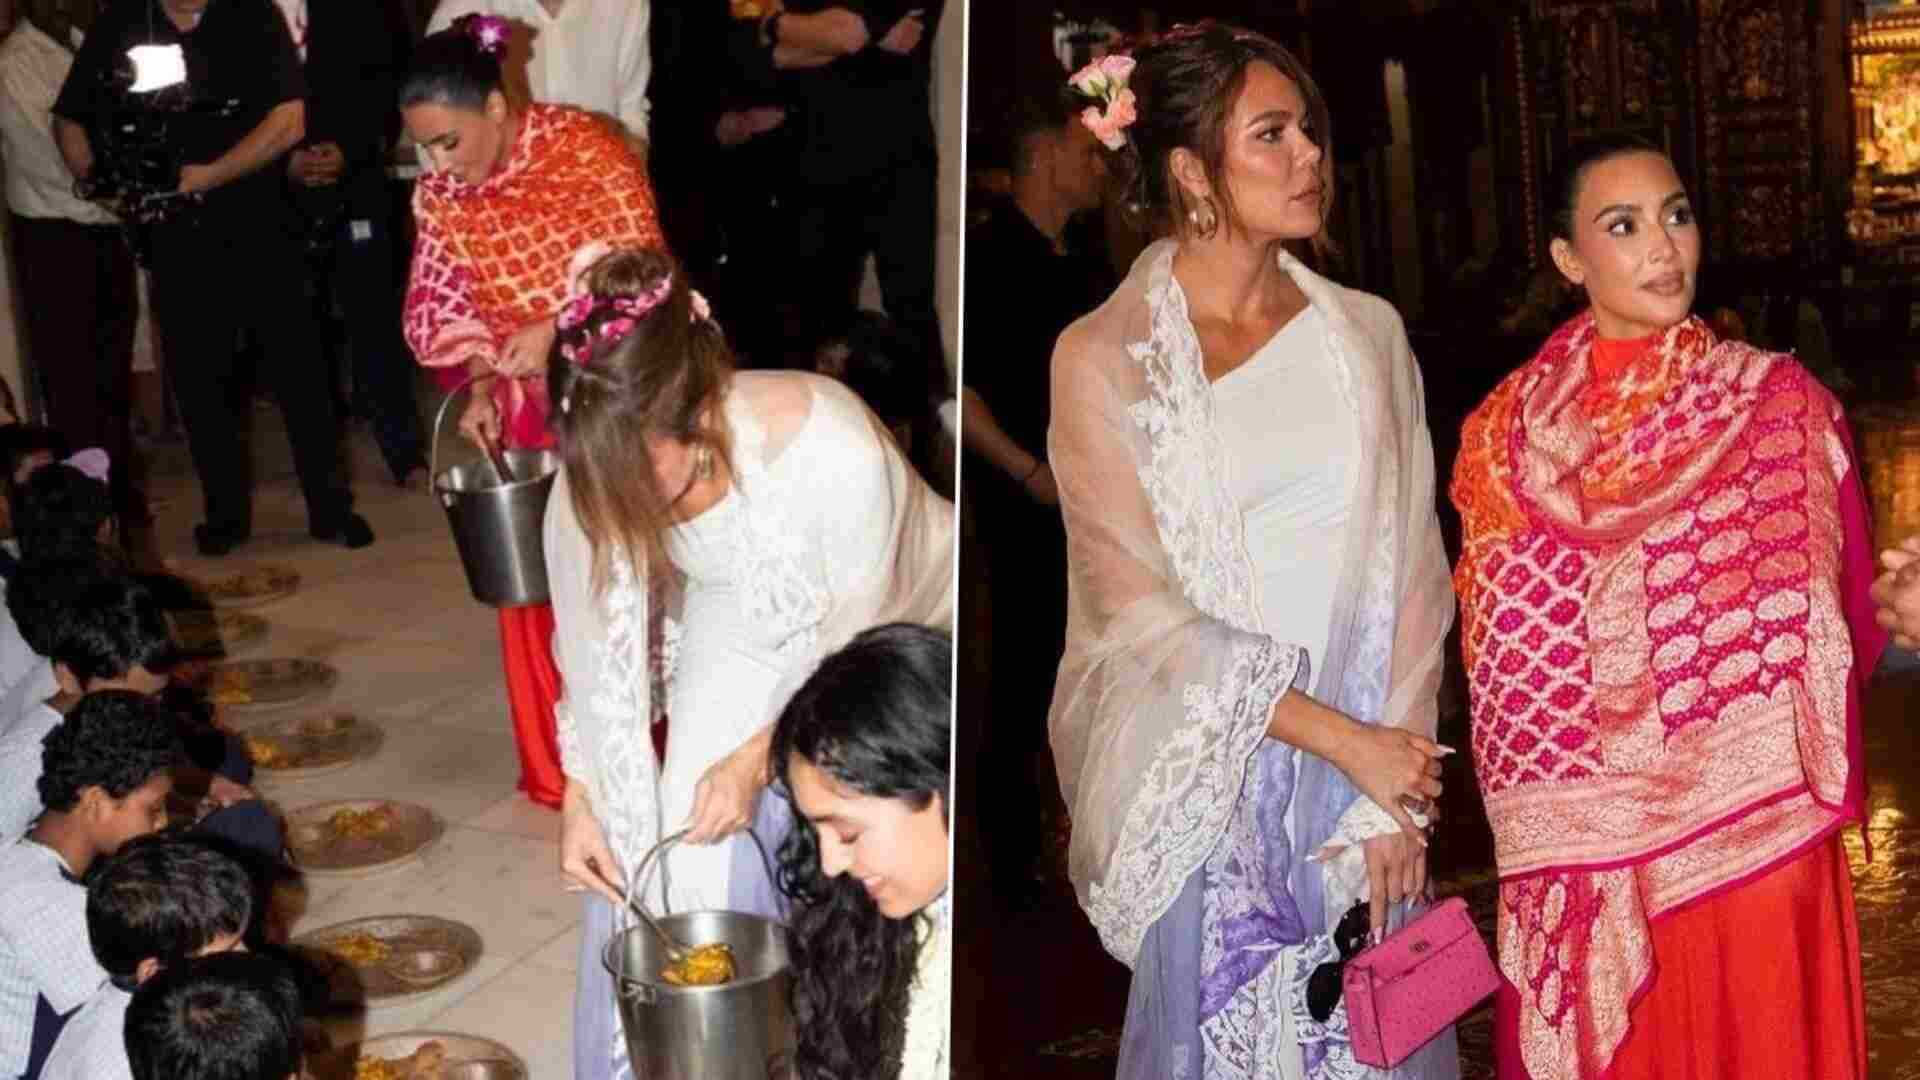 Kim And Khloe Kardashian Serve Food To Children At ISKCON Temple | See Here